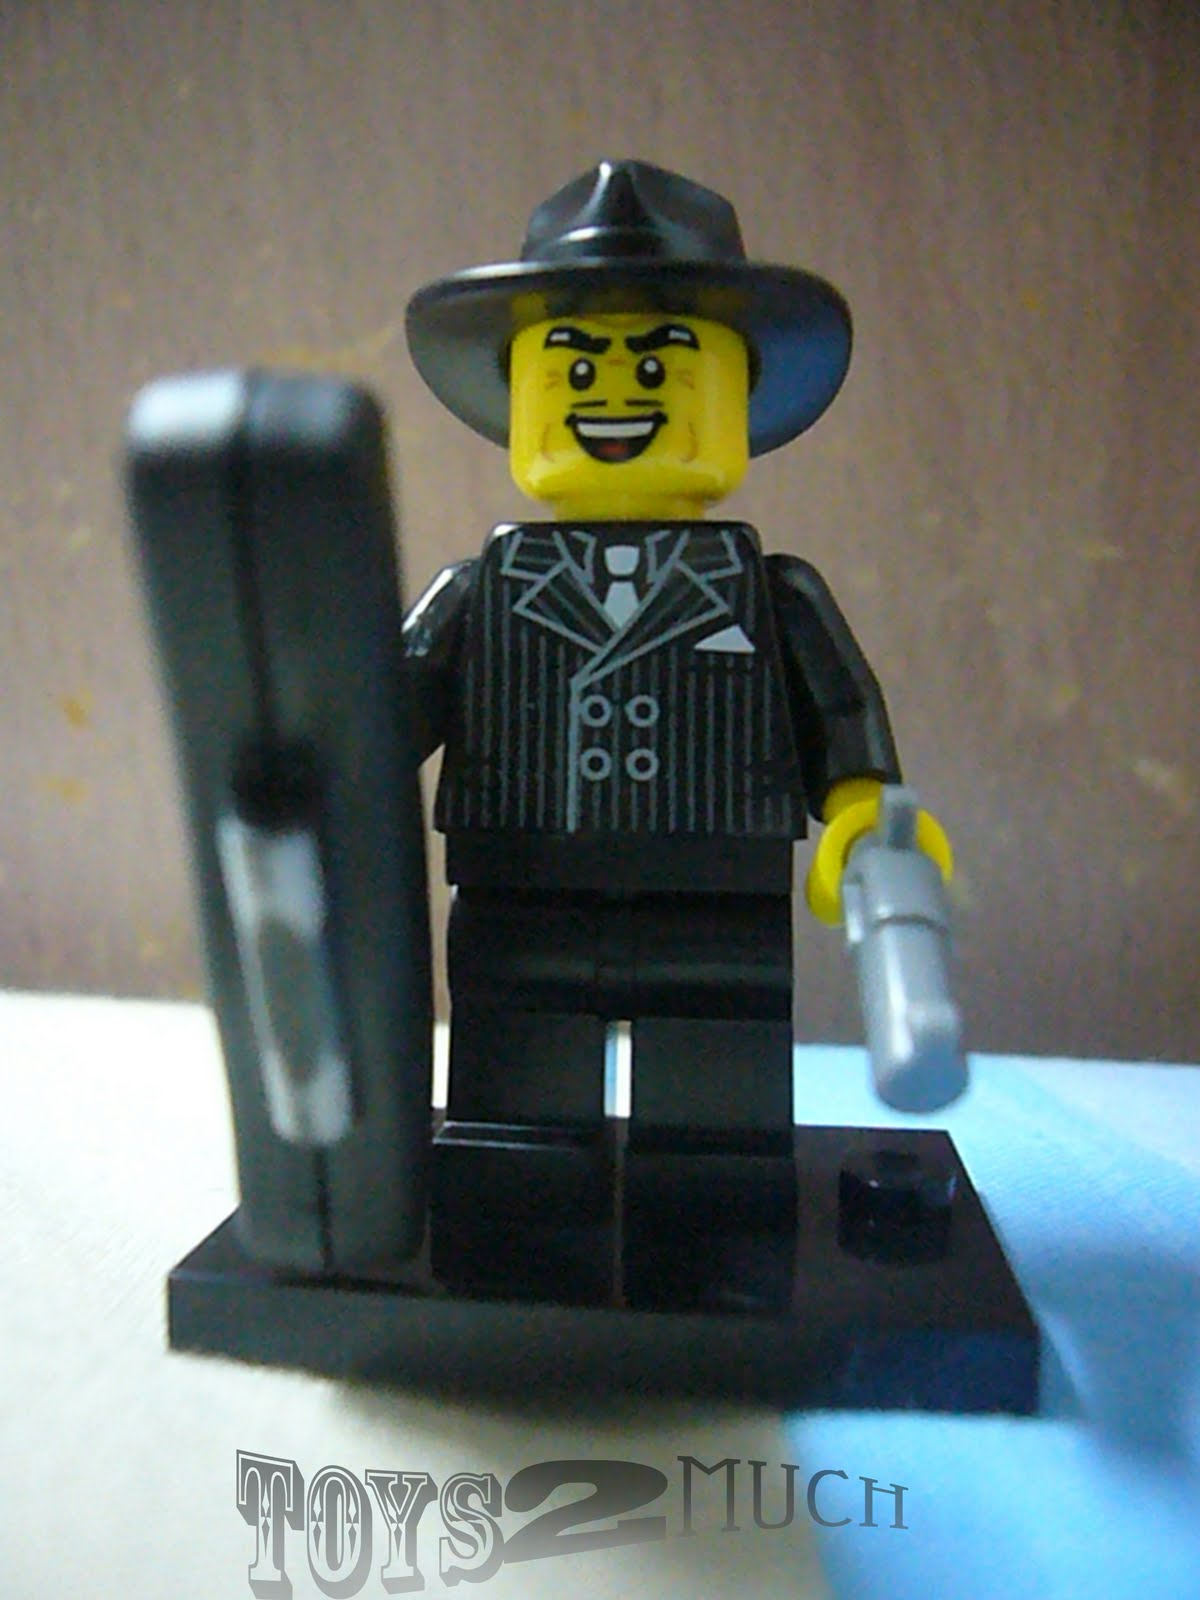 TOYS2MUCH: My LEGO Minifigures Series 5